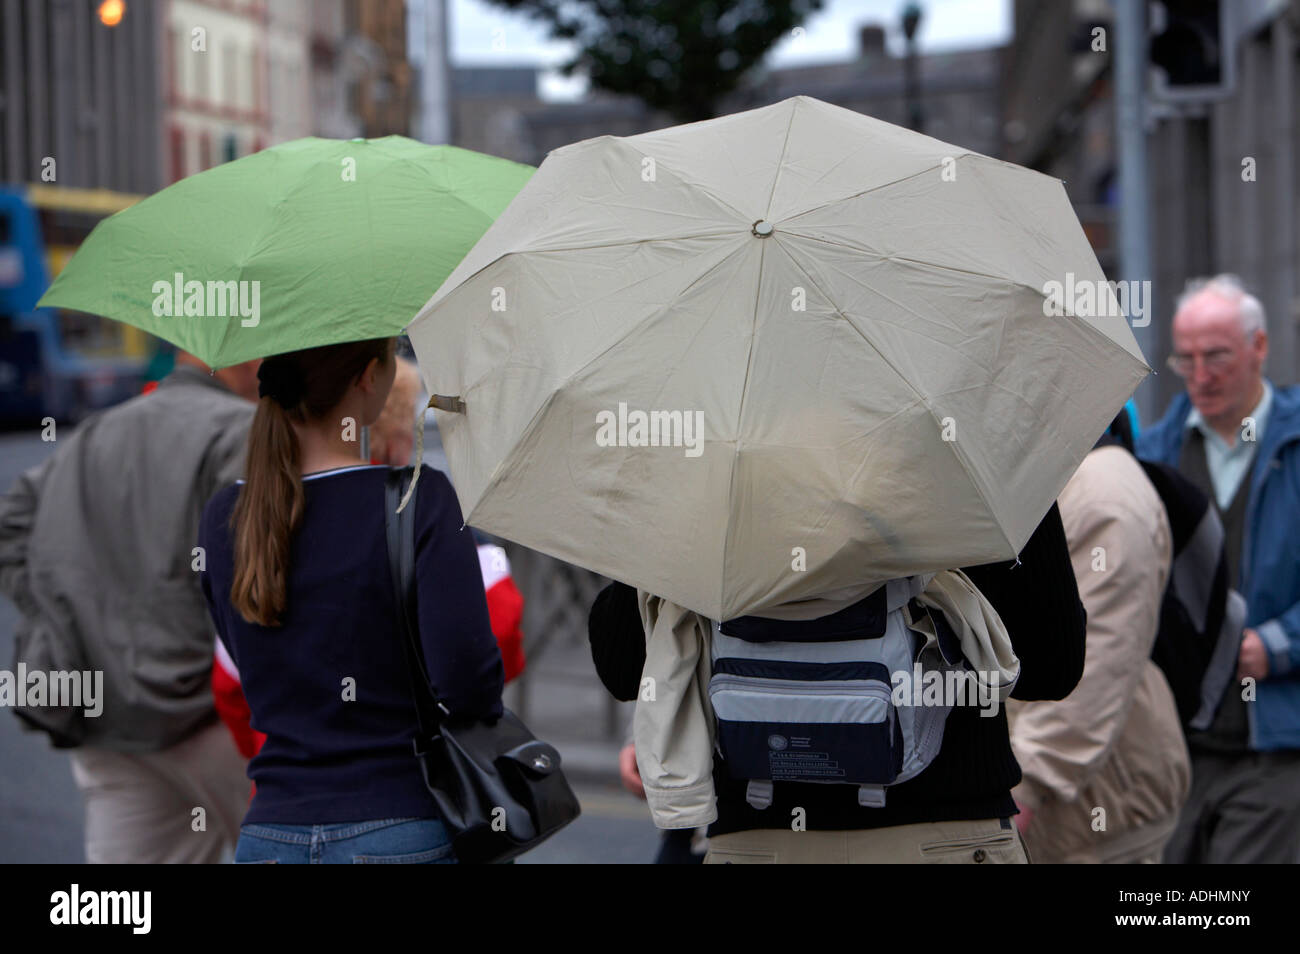 man with backpack and woman with handbag carrying umbrellas waiting to cross the road in dublin Stock Photo